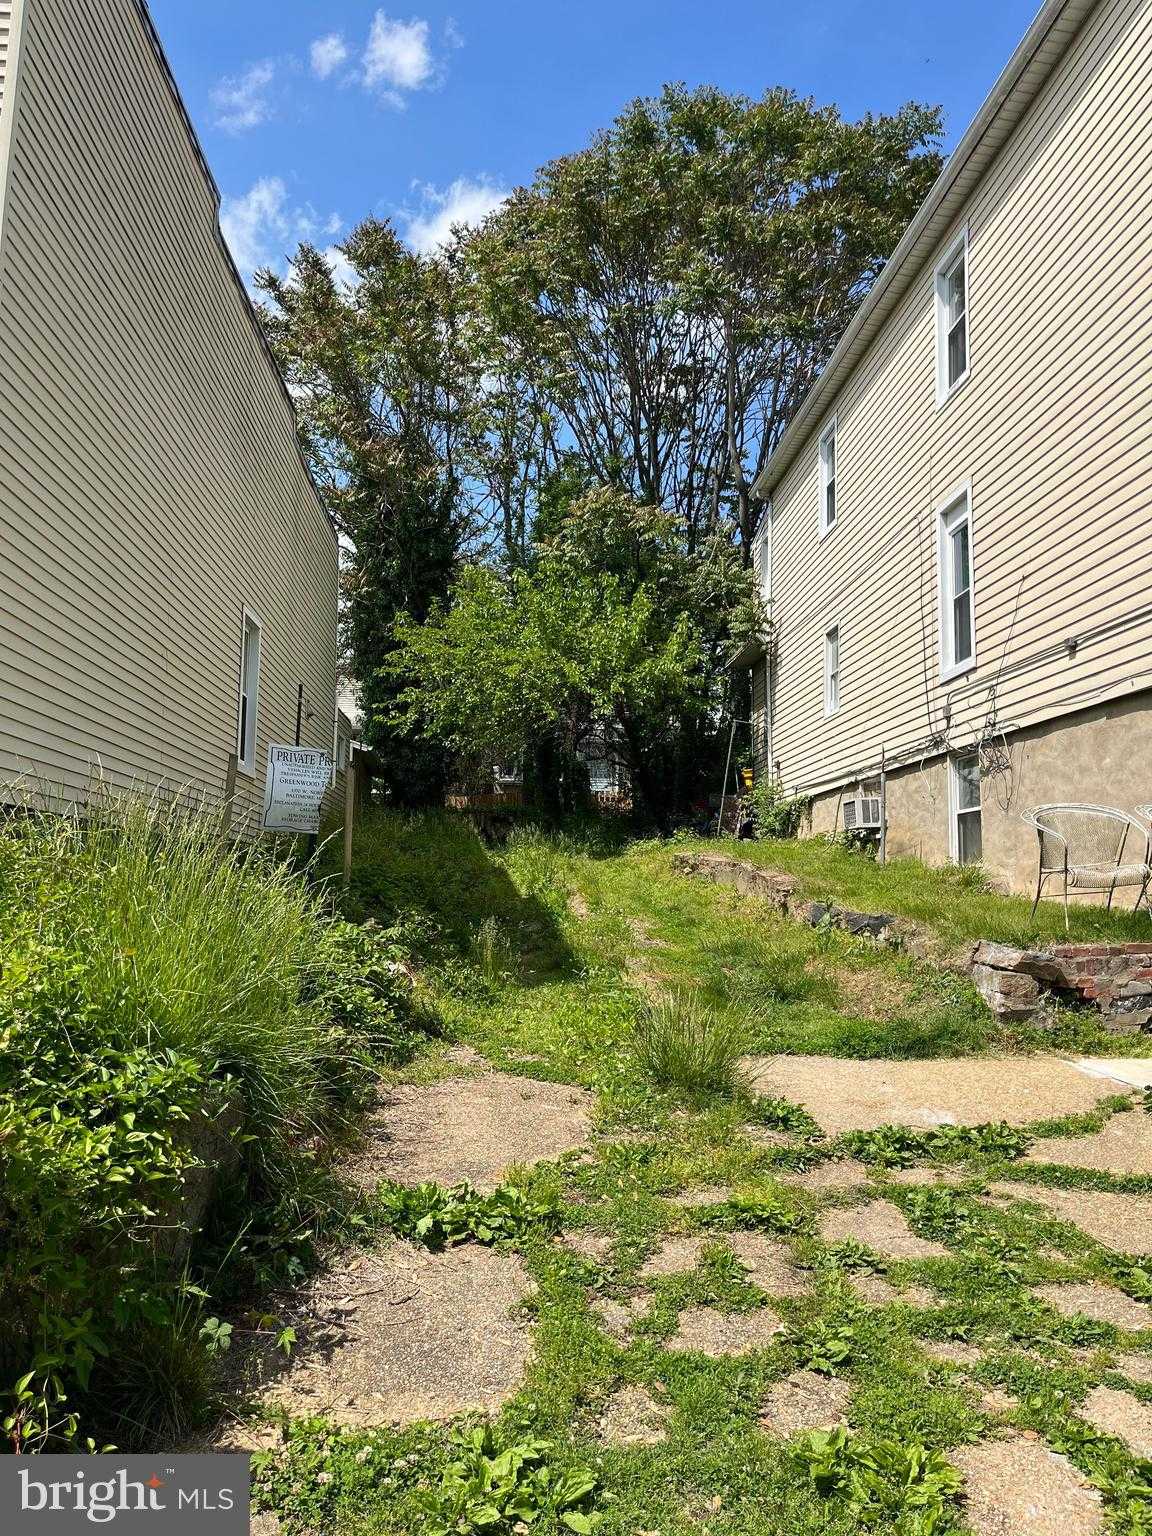 Photo 1 of 1 of 1336 DELLWOOD AVENUE land